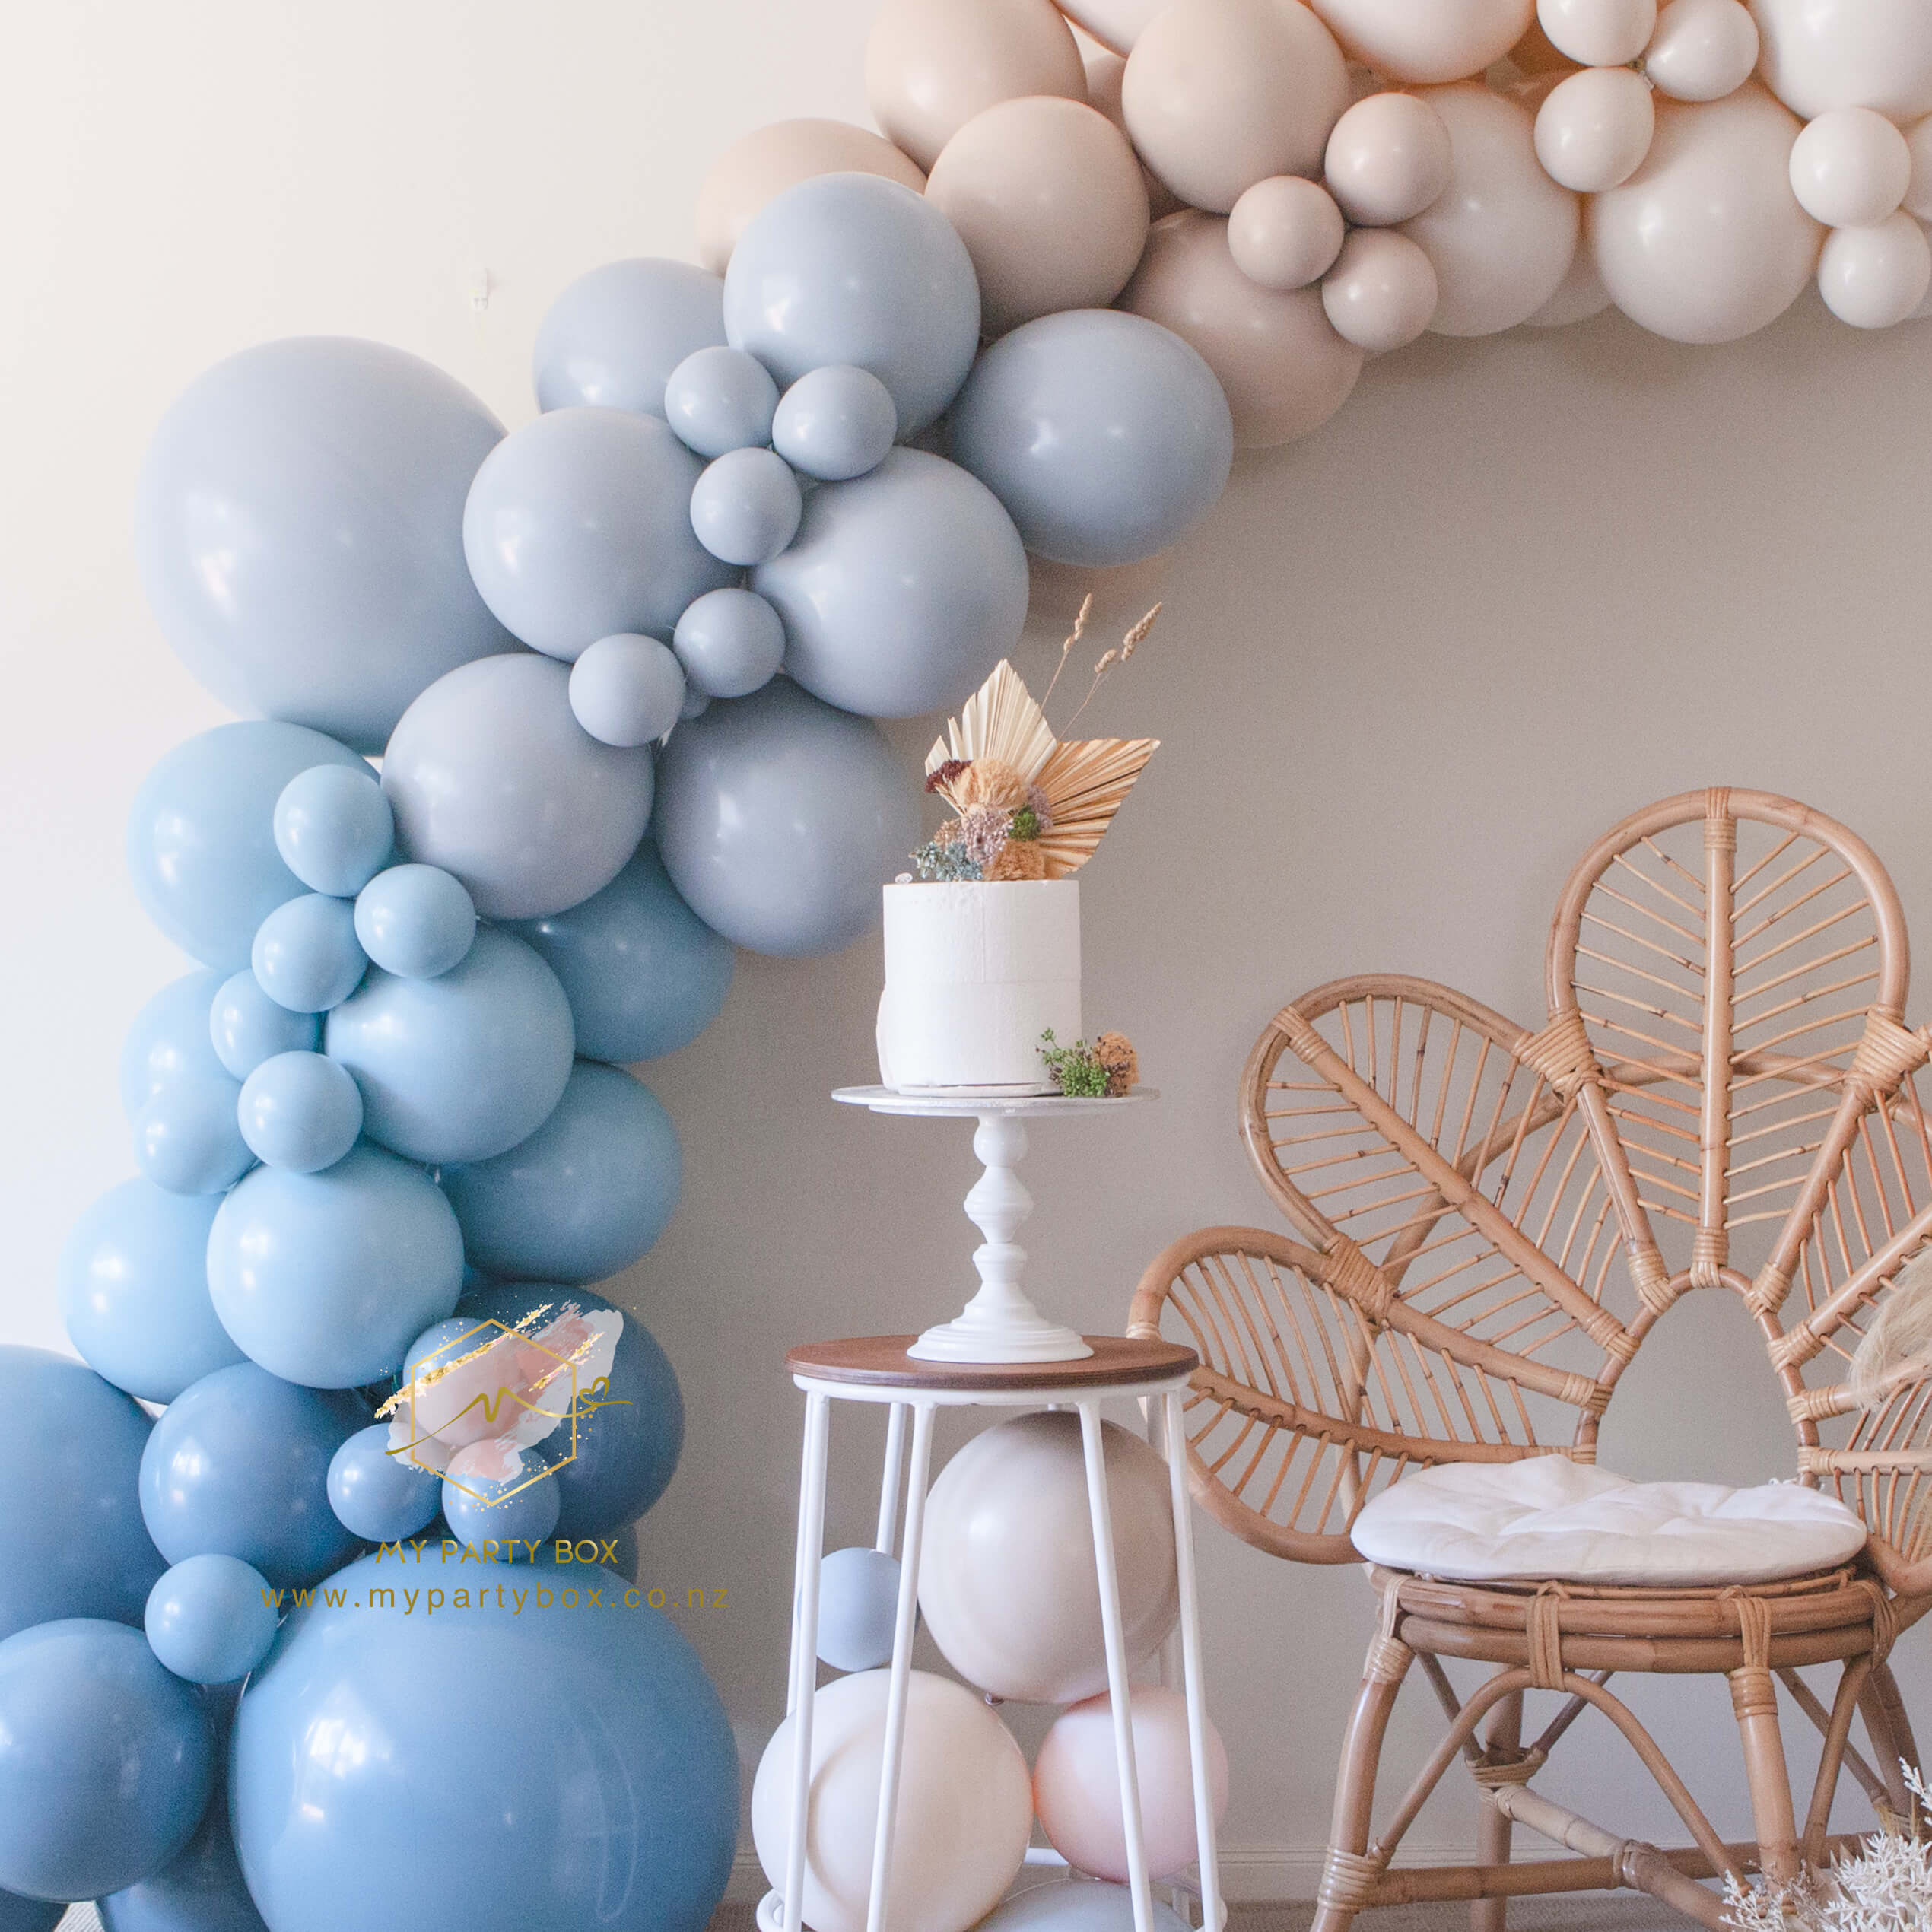 My Party Box Luxe Peter Rabbit Balloon Garland DIY Kit with solid blue slate, solid seaglass, solid fog, teddy sand, mustard chalk, whitesand chalk latex balloons